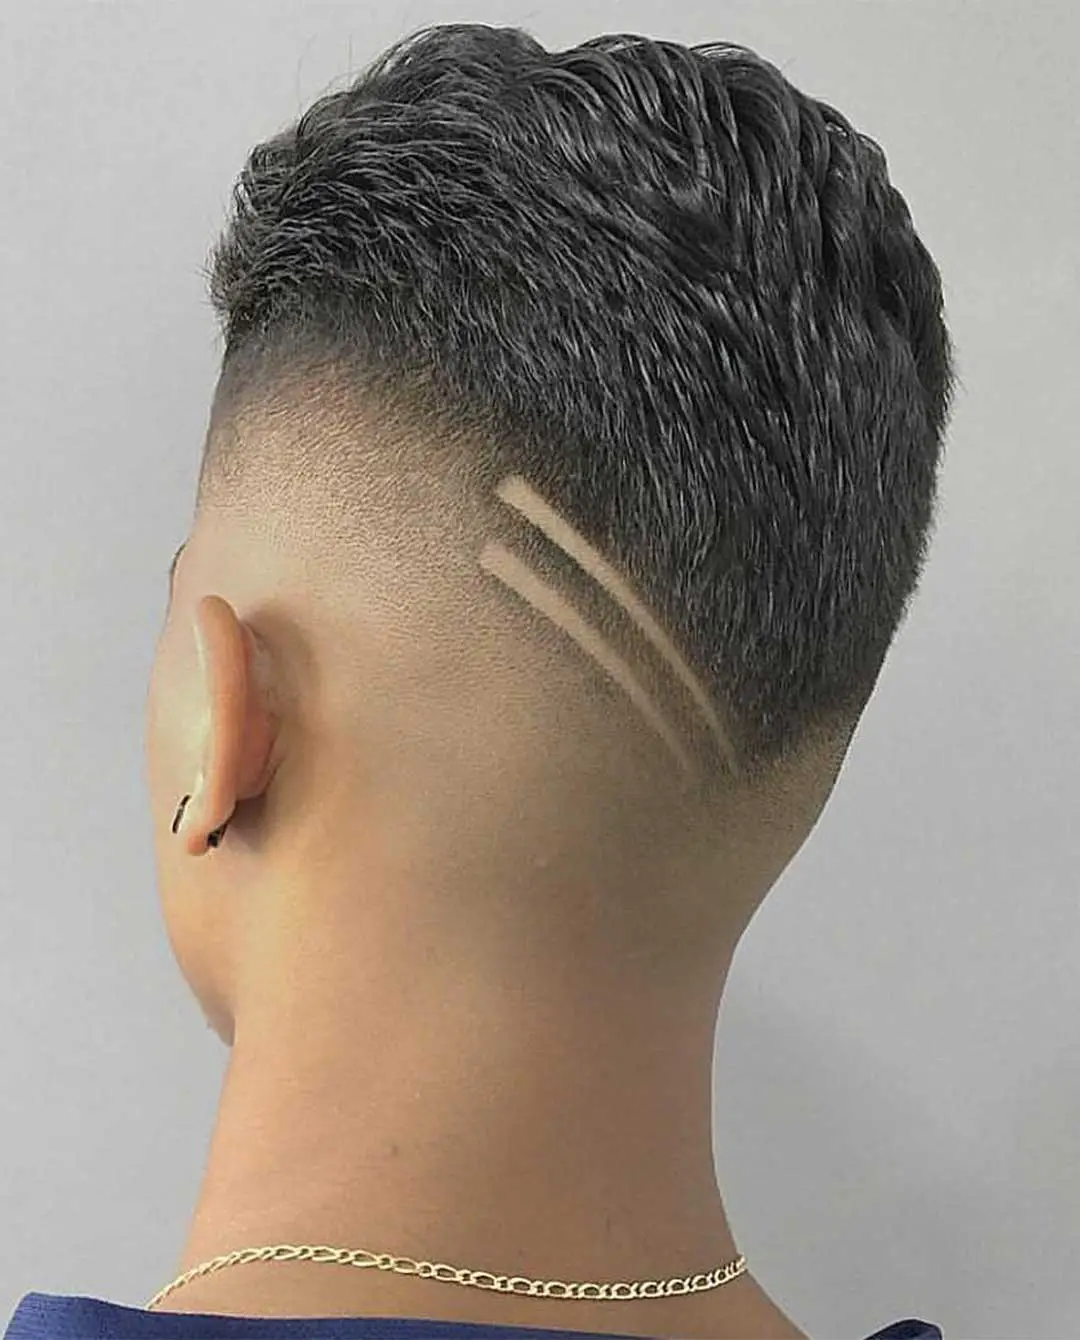 42+ Cool Hair Designs for Men in 2023 - Men's Hairstyle Tips